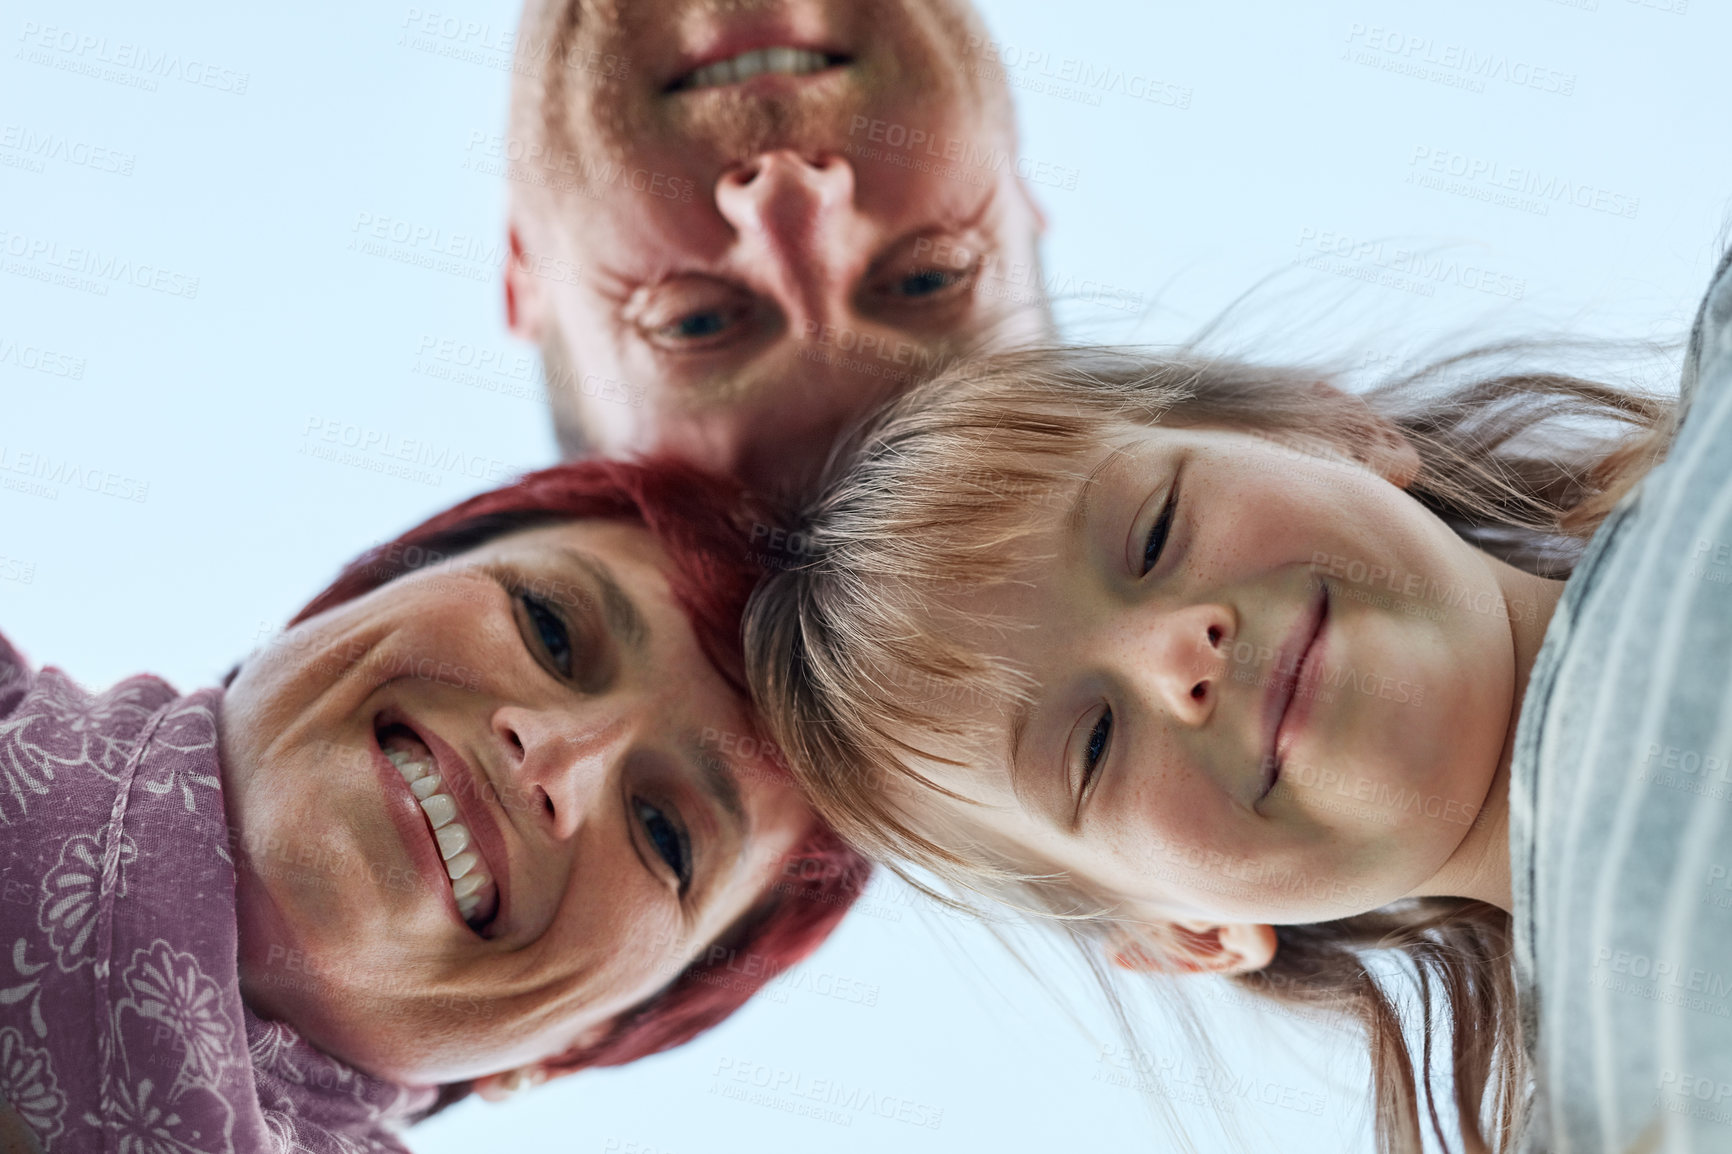 Buy stock photo Low angle portrait of a cute little girl and her parents putting their heads together